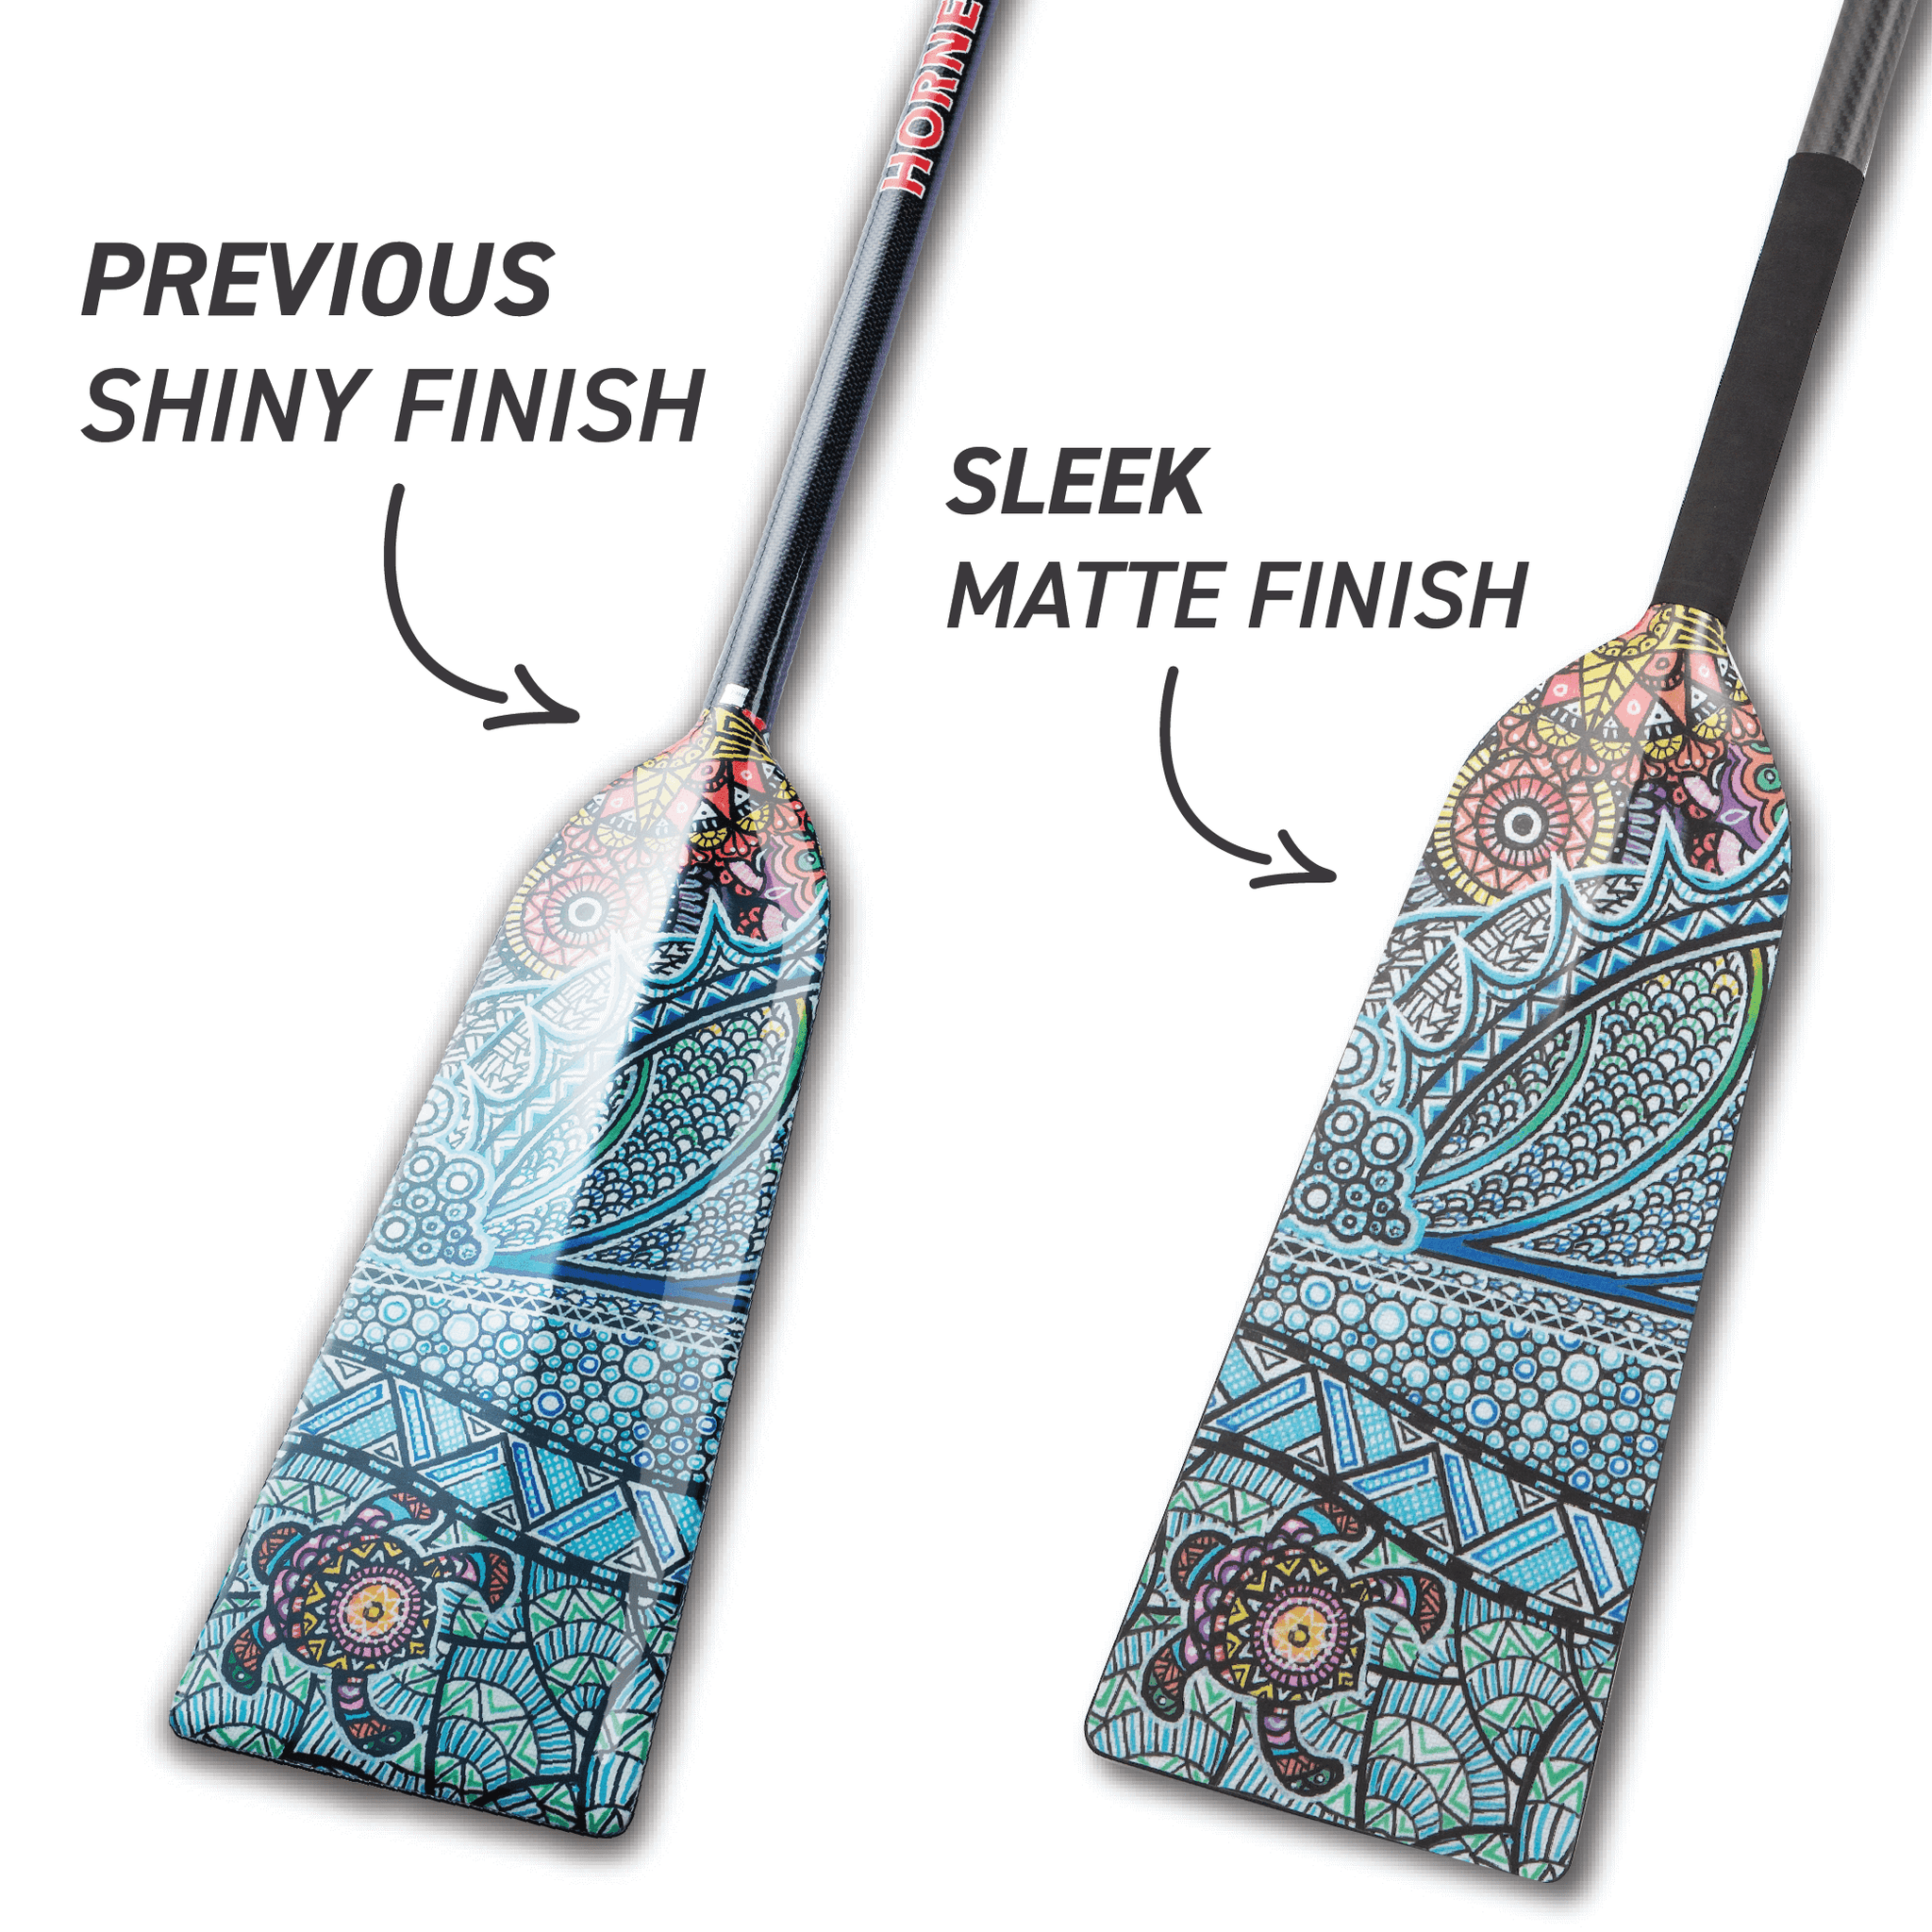 CLEARANCE- Factory Seconds: Blue Dragon X33 Sting+ Adjustable Dragon Boat Paddle